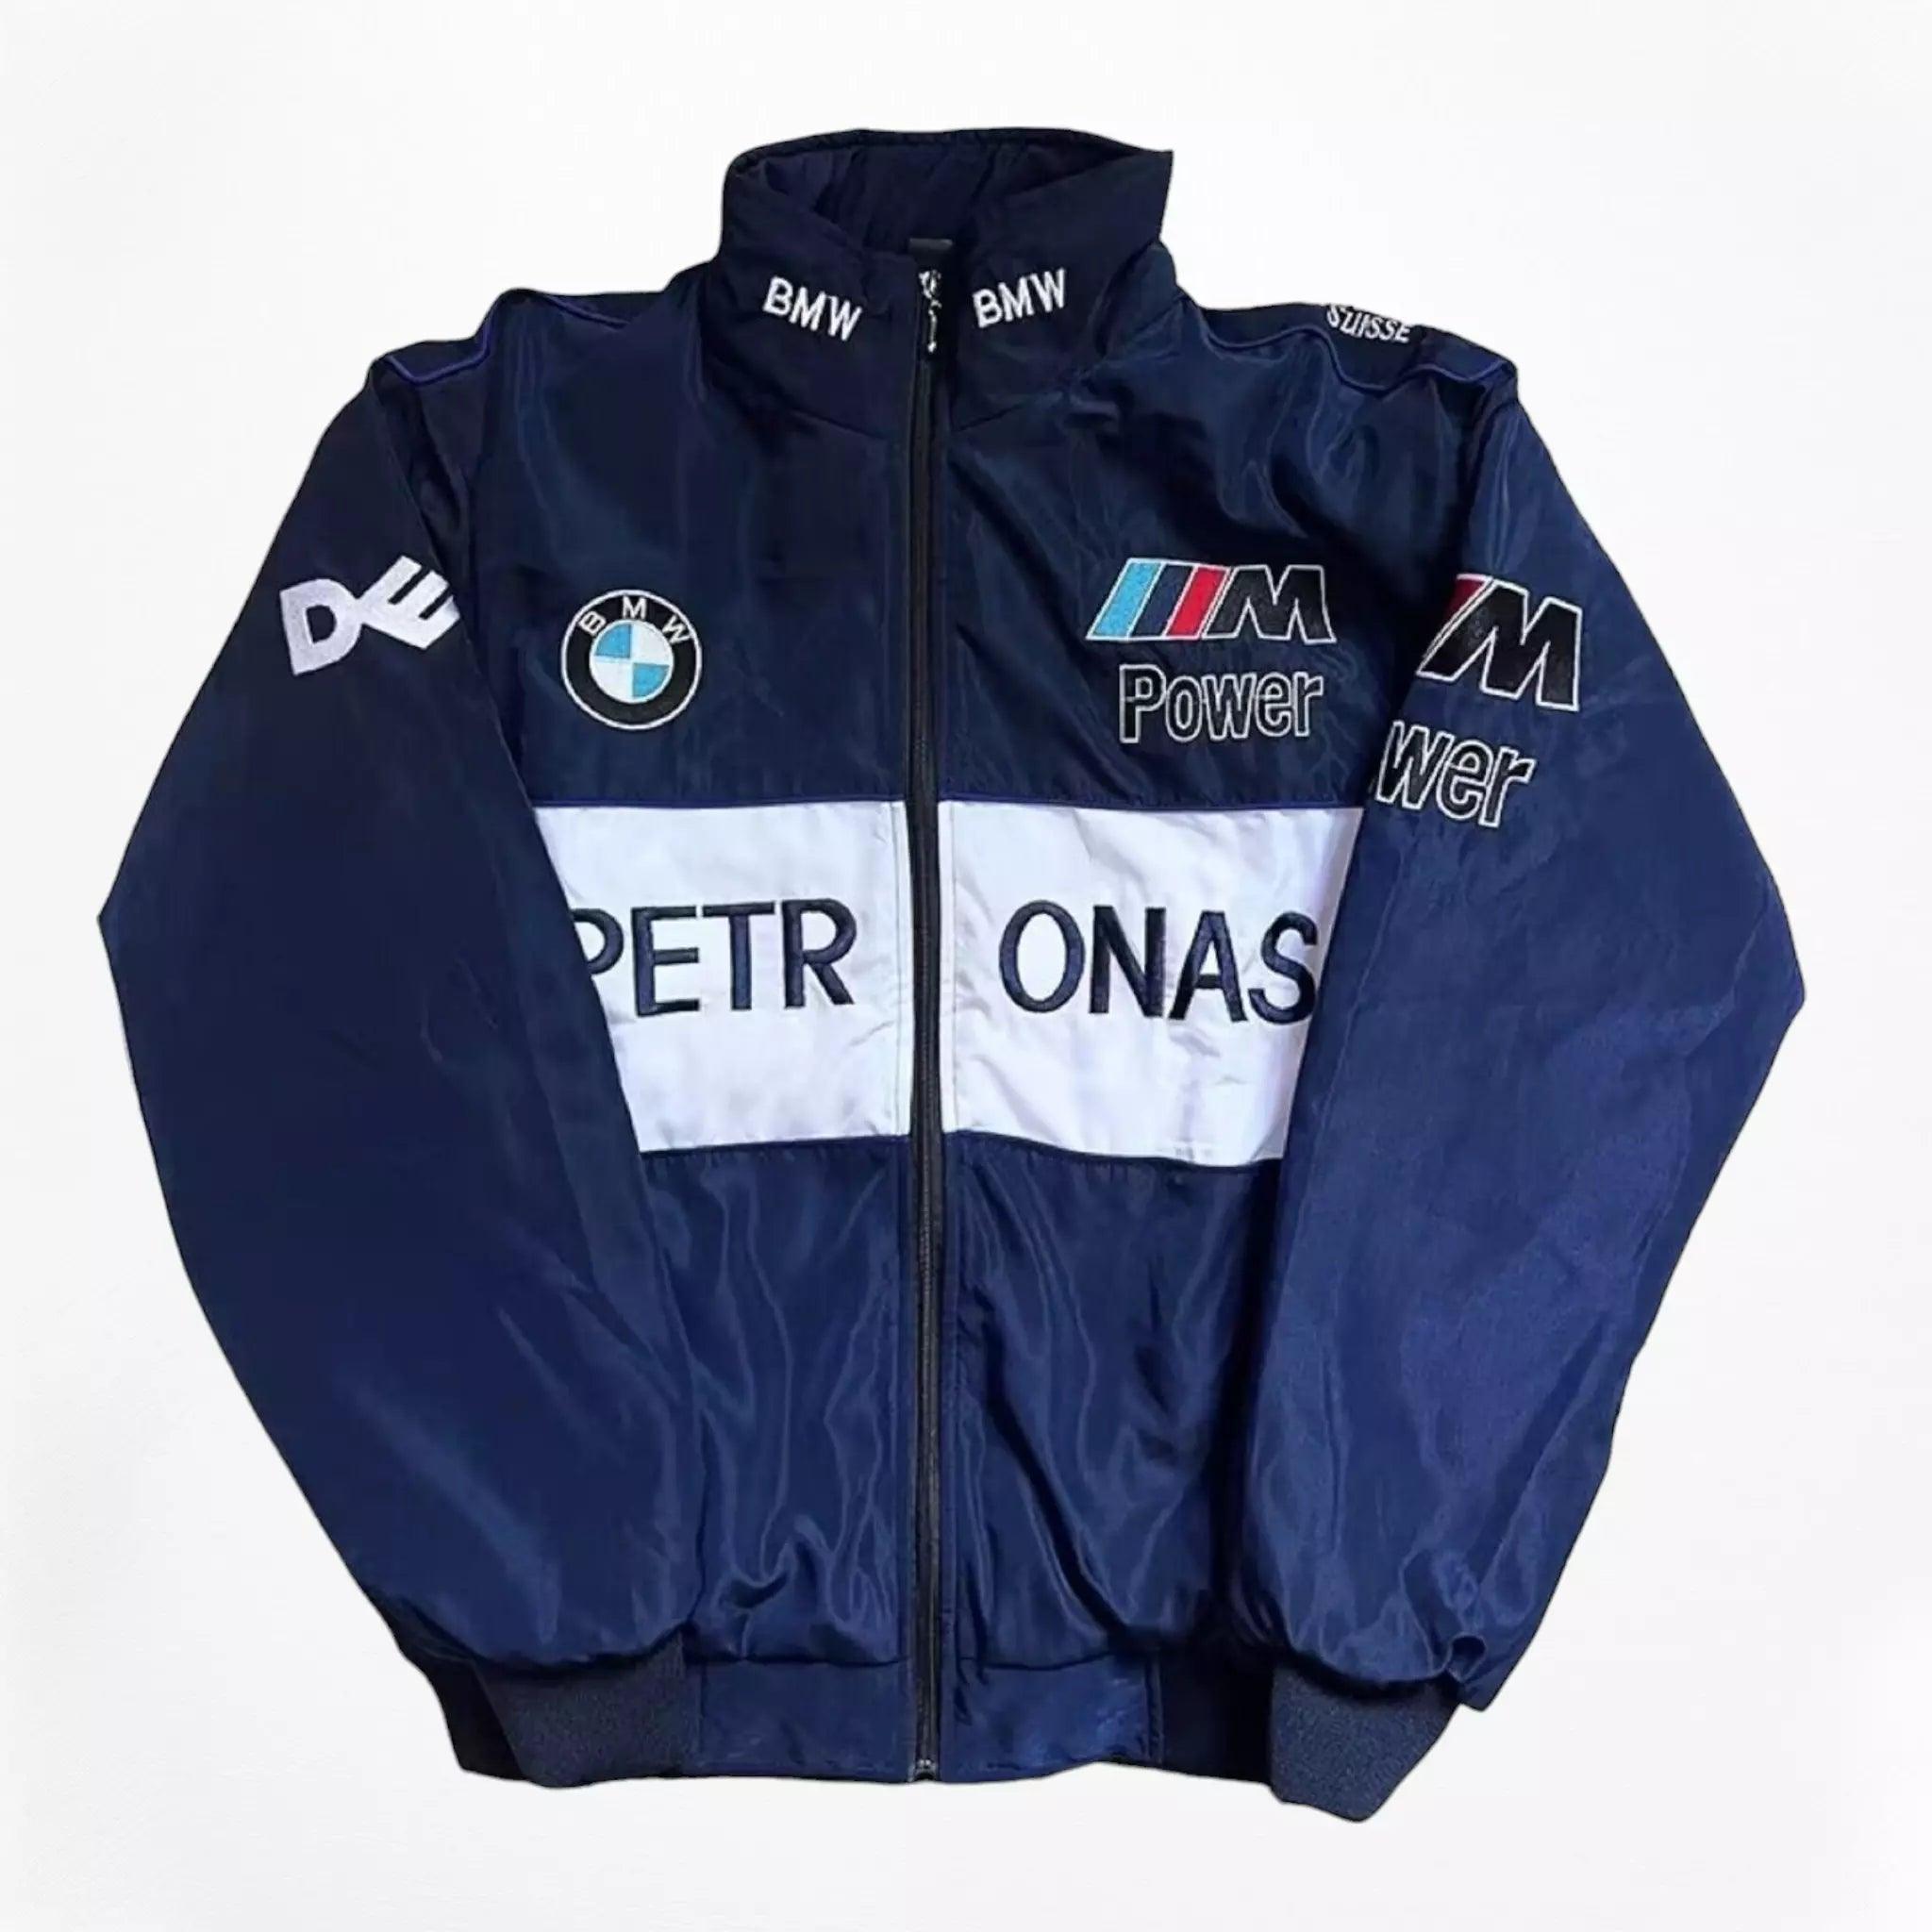 BMW Personalized Car Racing Embroidery Jacket - Dash Racegear 